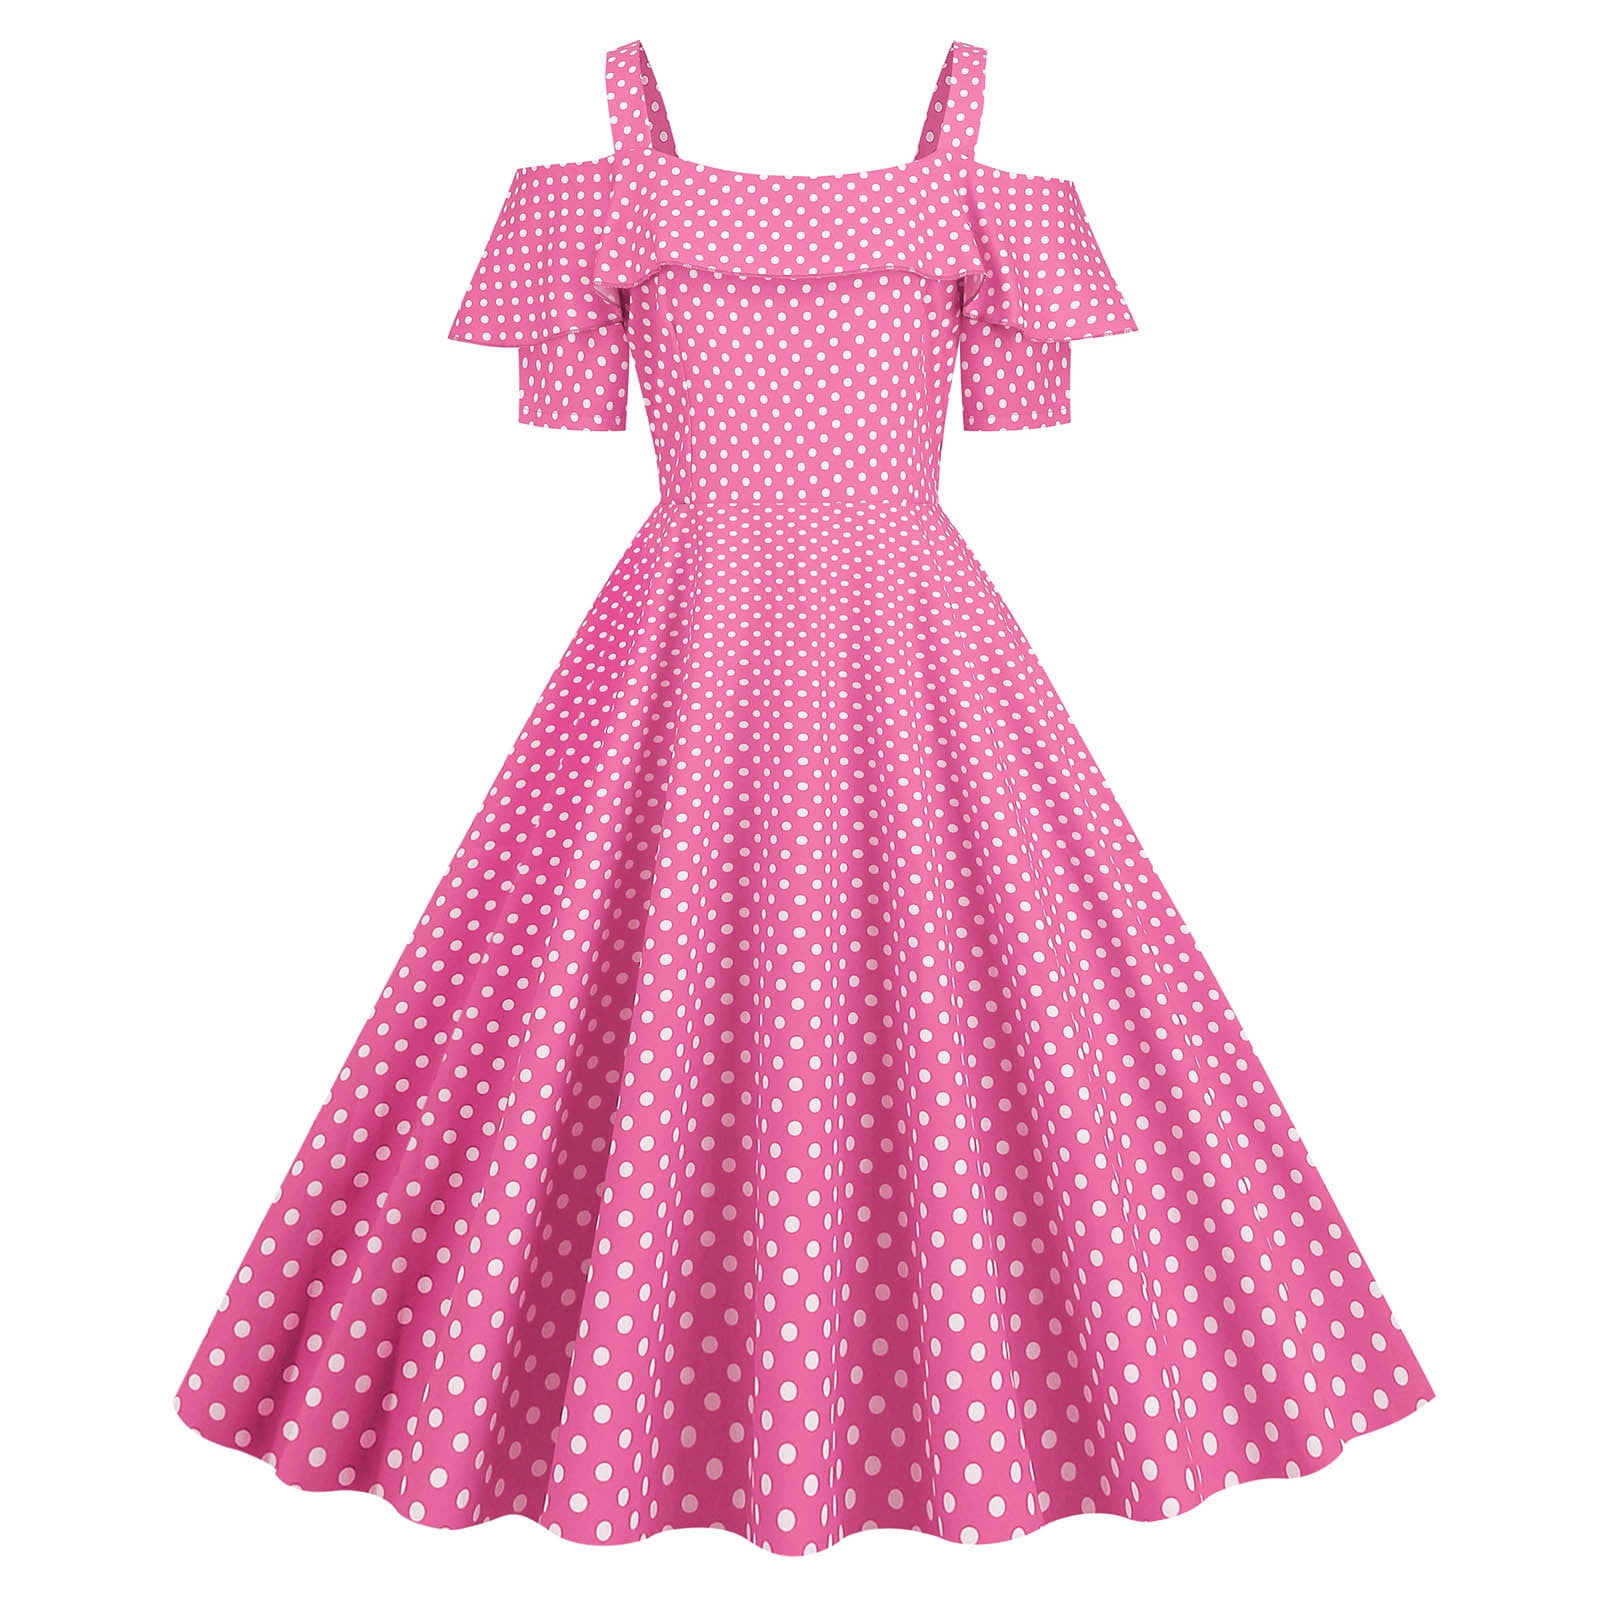 Contrast bright yellow-pink tea length baby party dress with